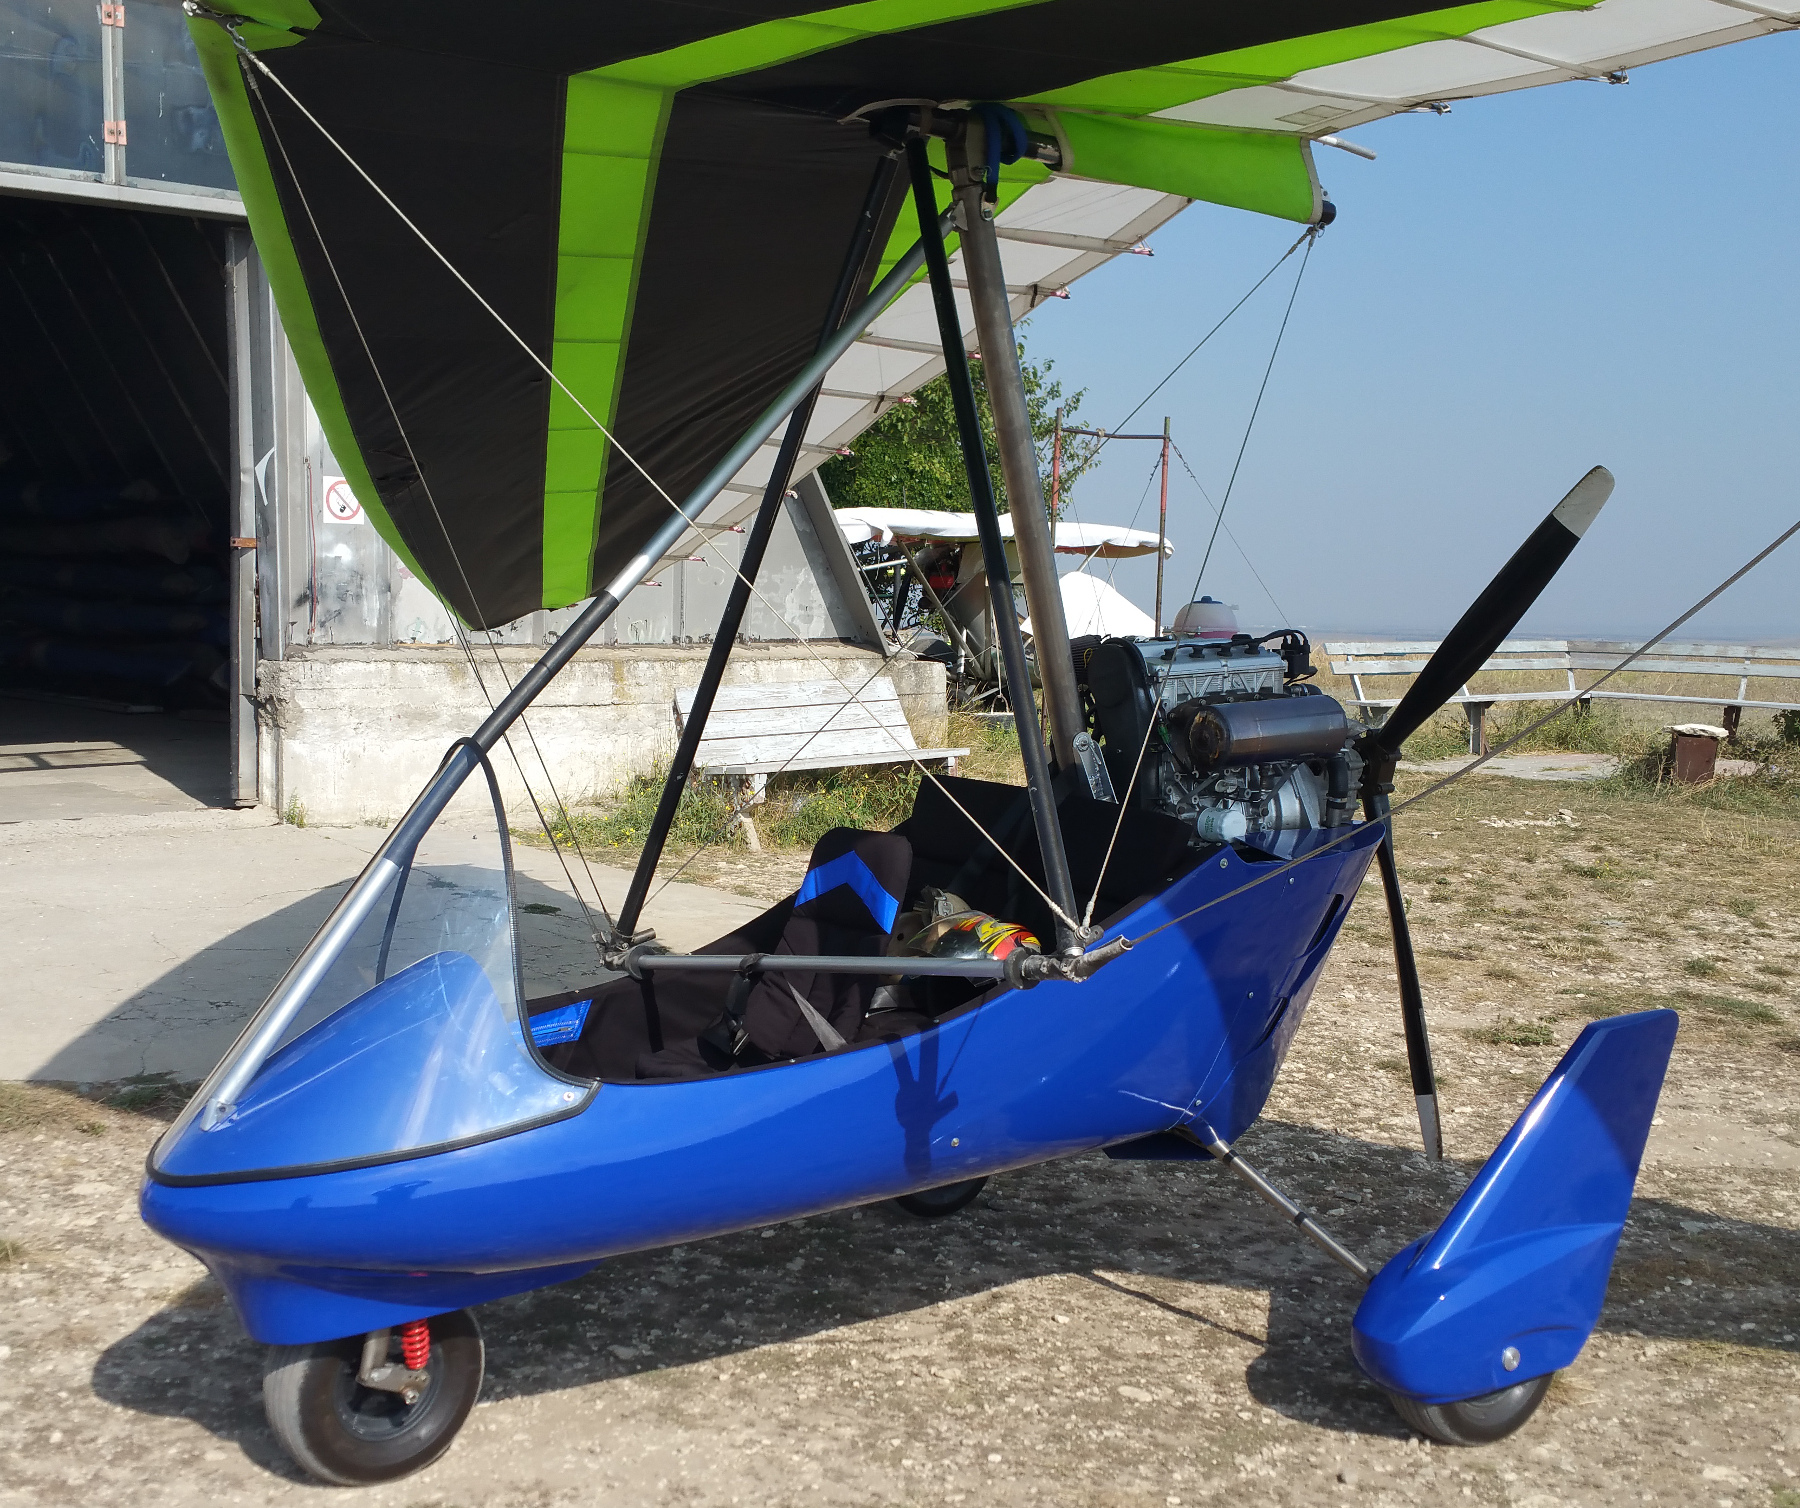 Ultralight Plane For Sale Used